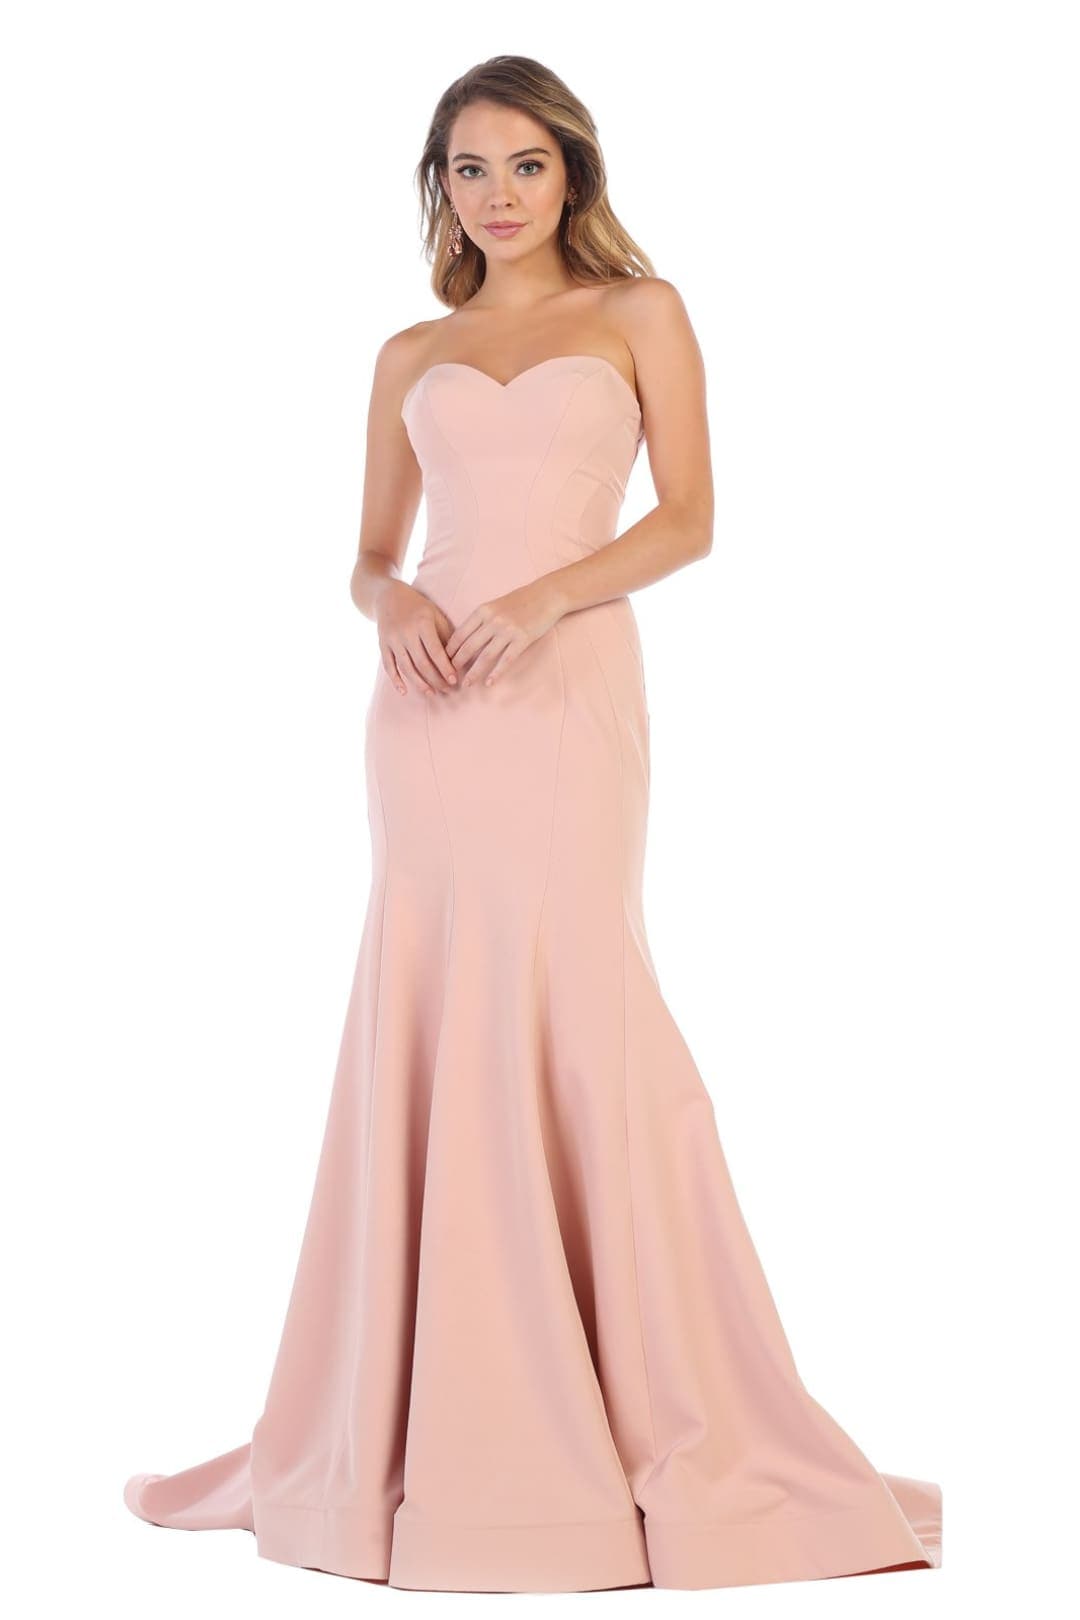 Beautiful Bridesmaids Gown - Dusty Rose / 4